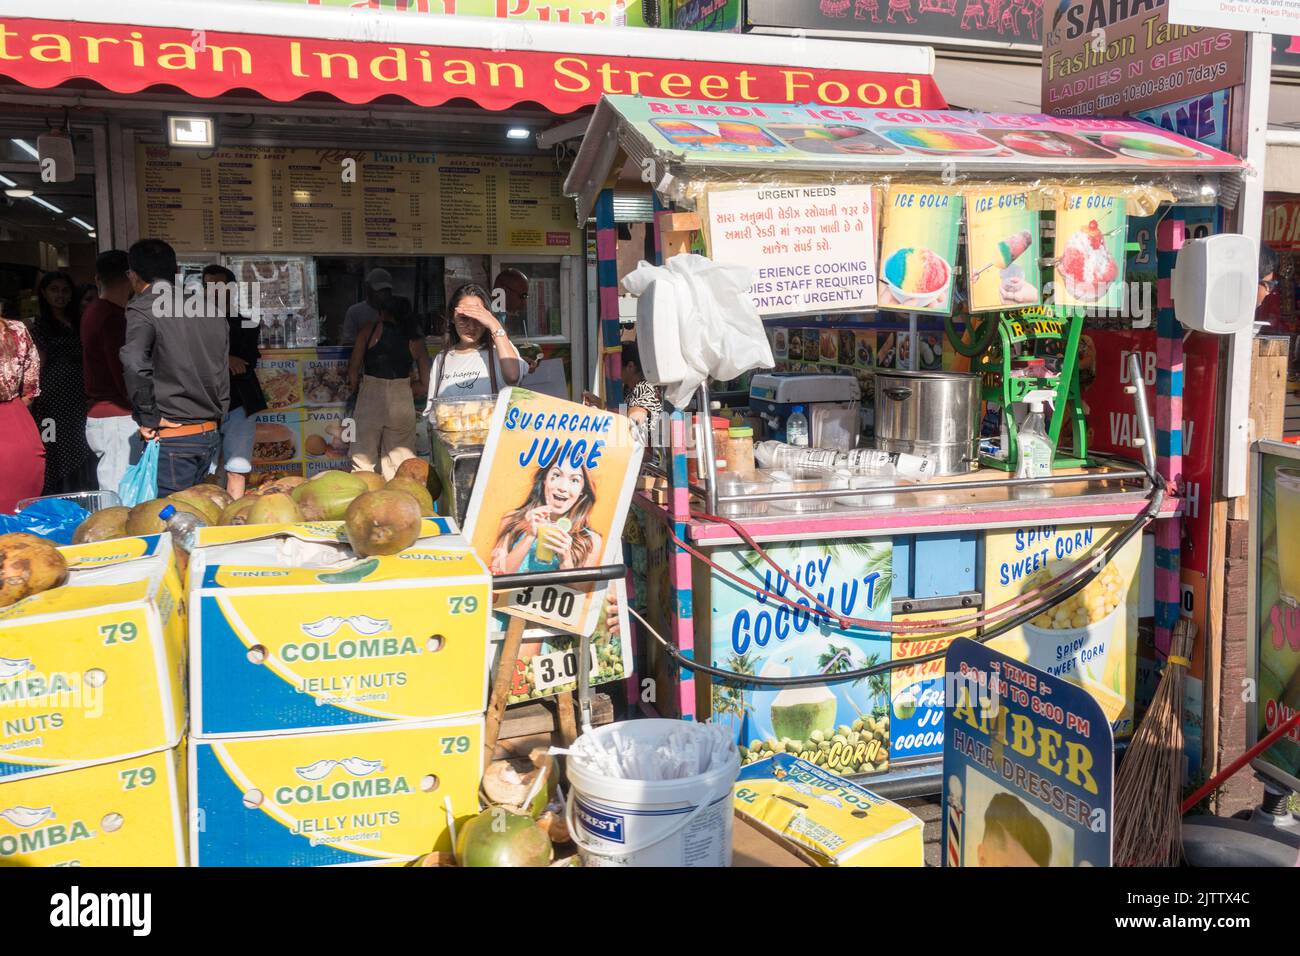 Indian Street food shop in Wembley Stock Photo